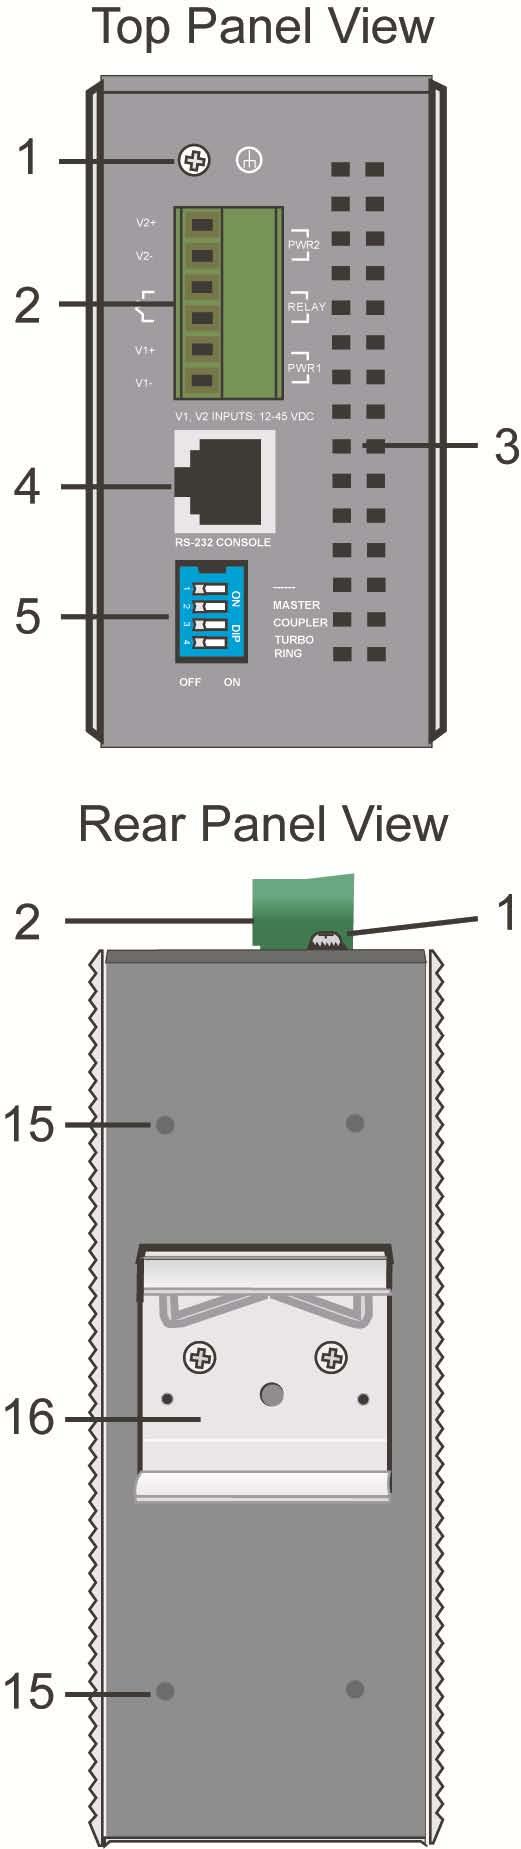 1 Panel Layout 1 Grounding screw 2 Terminal block for power input PWR1/PWR2 and relay output 3 Heat dissipation vents 4 Console port 5 DIP switches 6 Power input PWR1 LED 7 Power input PWR2 LED 8